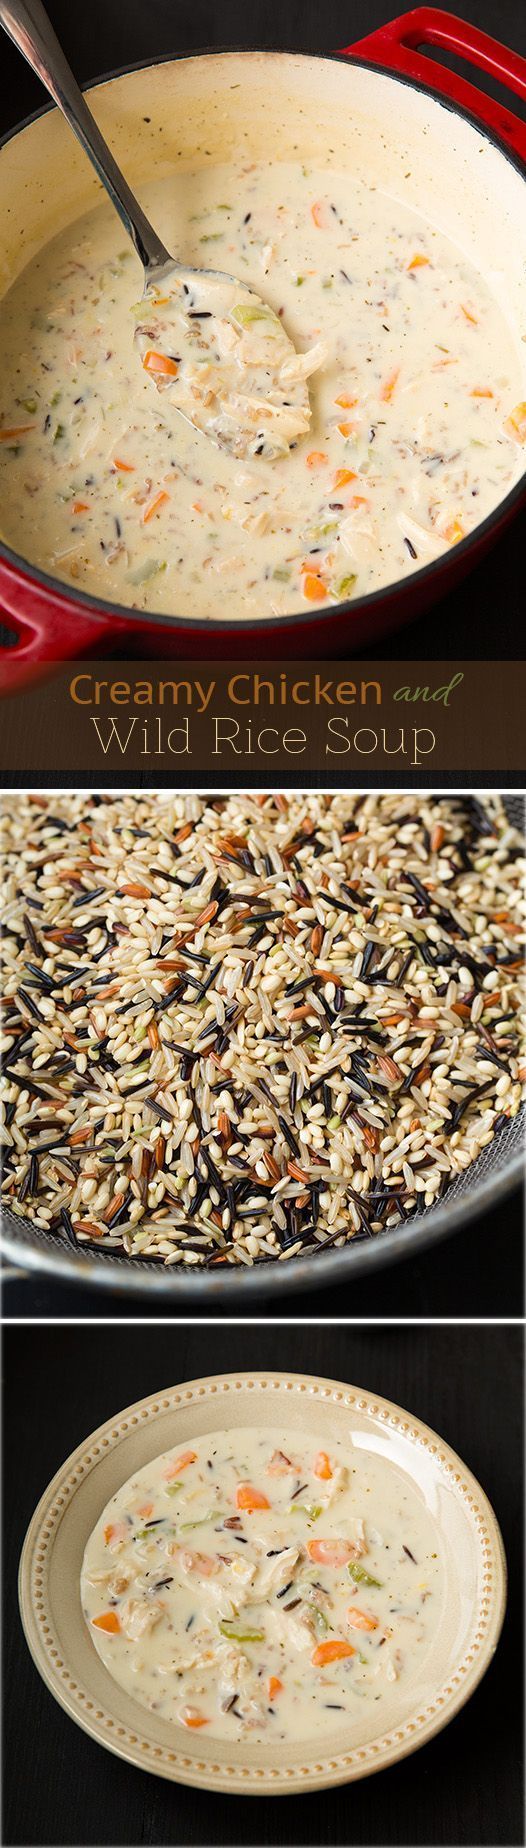 Creamy Chicken and Wild Rice Soup – This soup is a family favorite! Its so creamy and delicious!